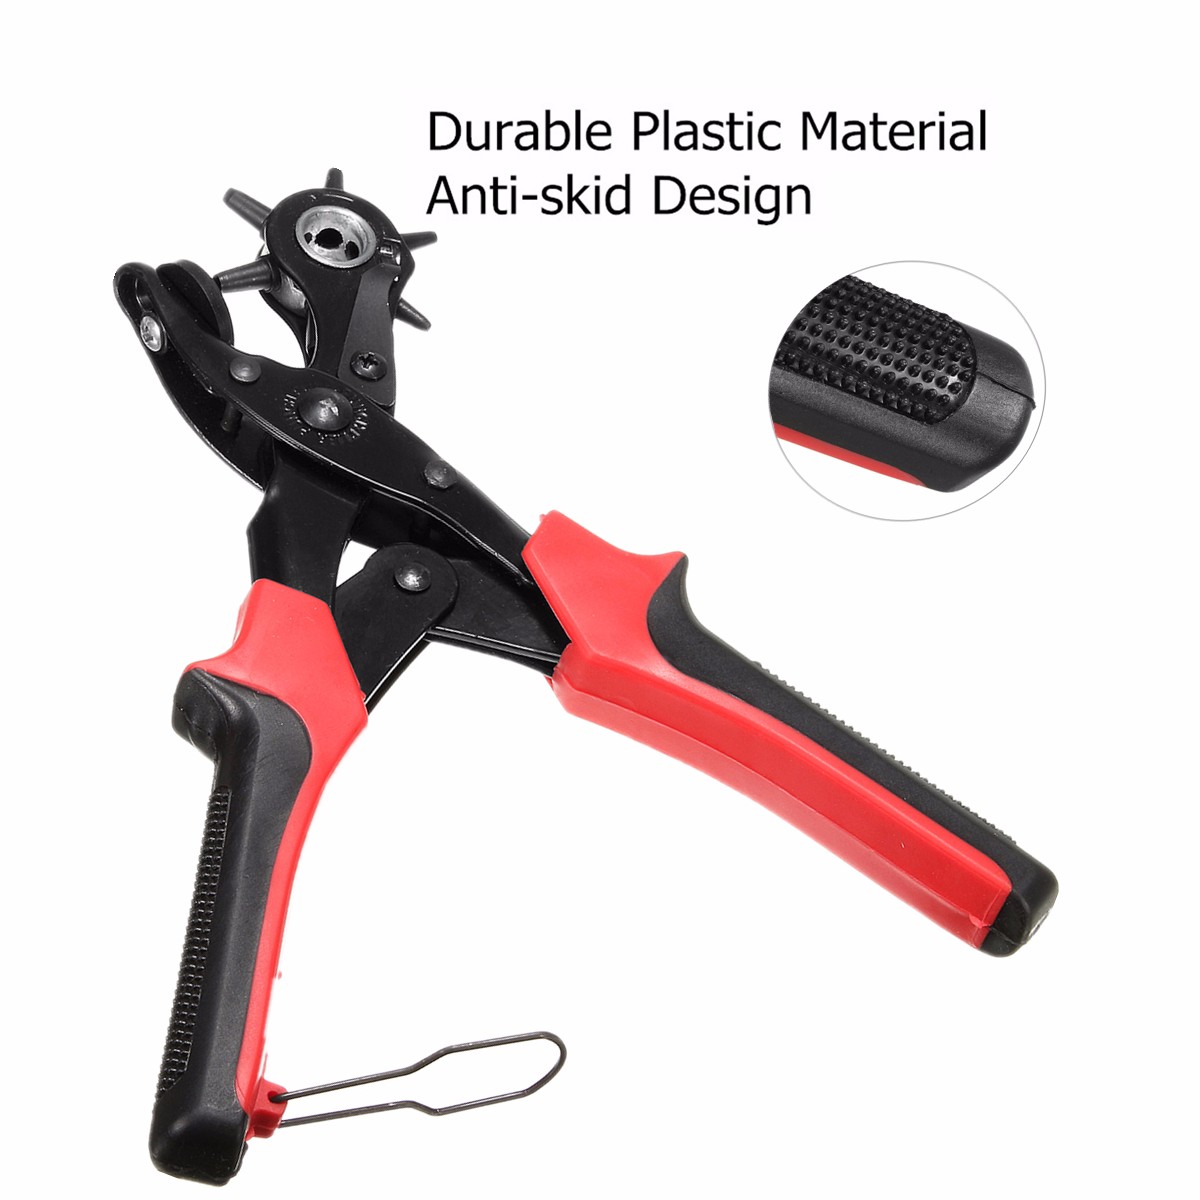 6-Sized-Heavy-Duty-Leather-Hole-Punch-Hand-Pliers-Belt-Holes-Punches-Maker-Tool-1150421